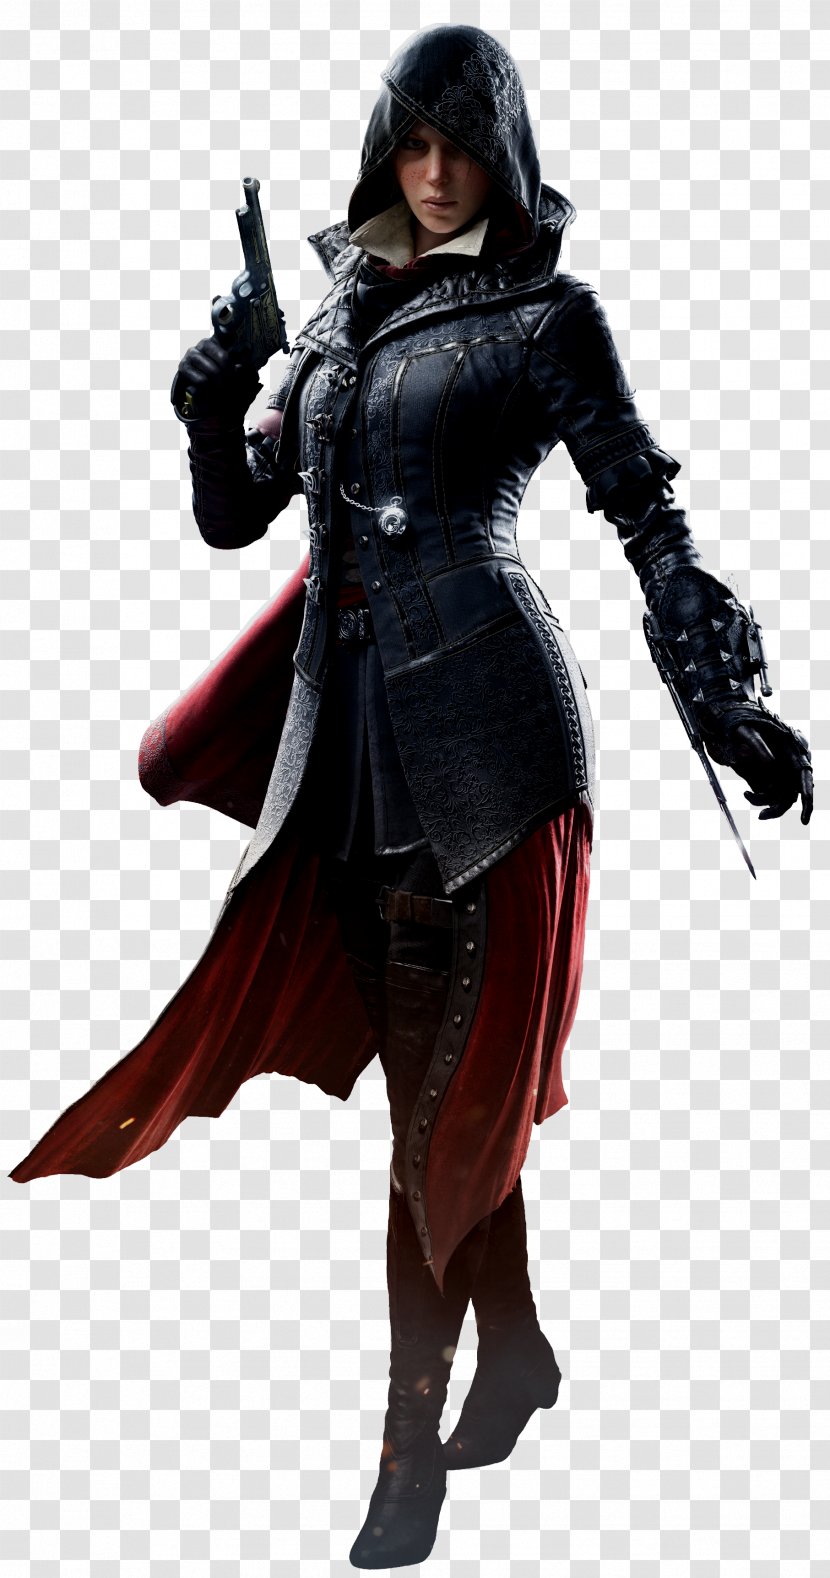 Assassin's Creed Syndicate III Creed: Brotherhood Video Game - Action Figure Transparent PNG